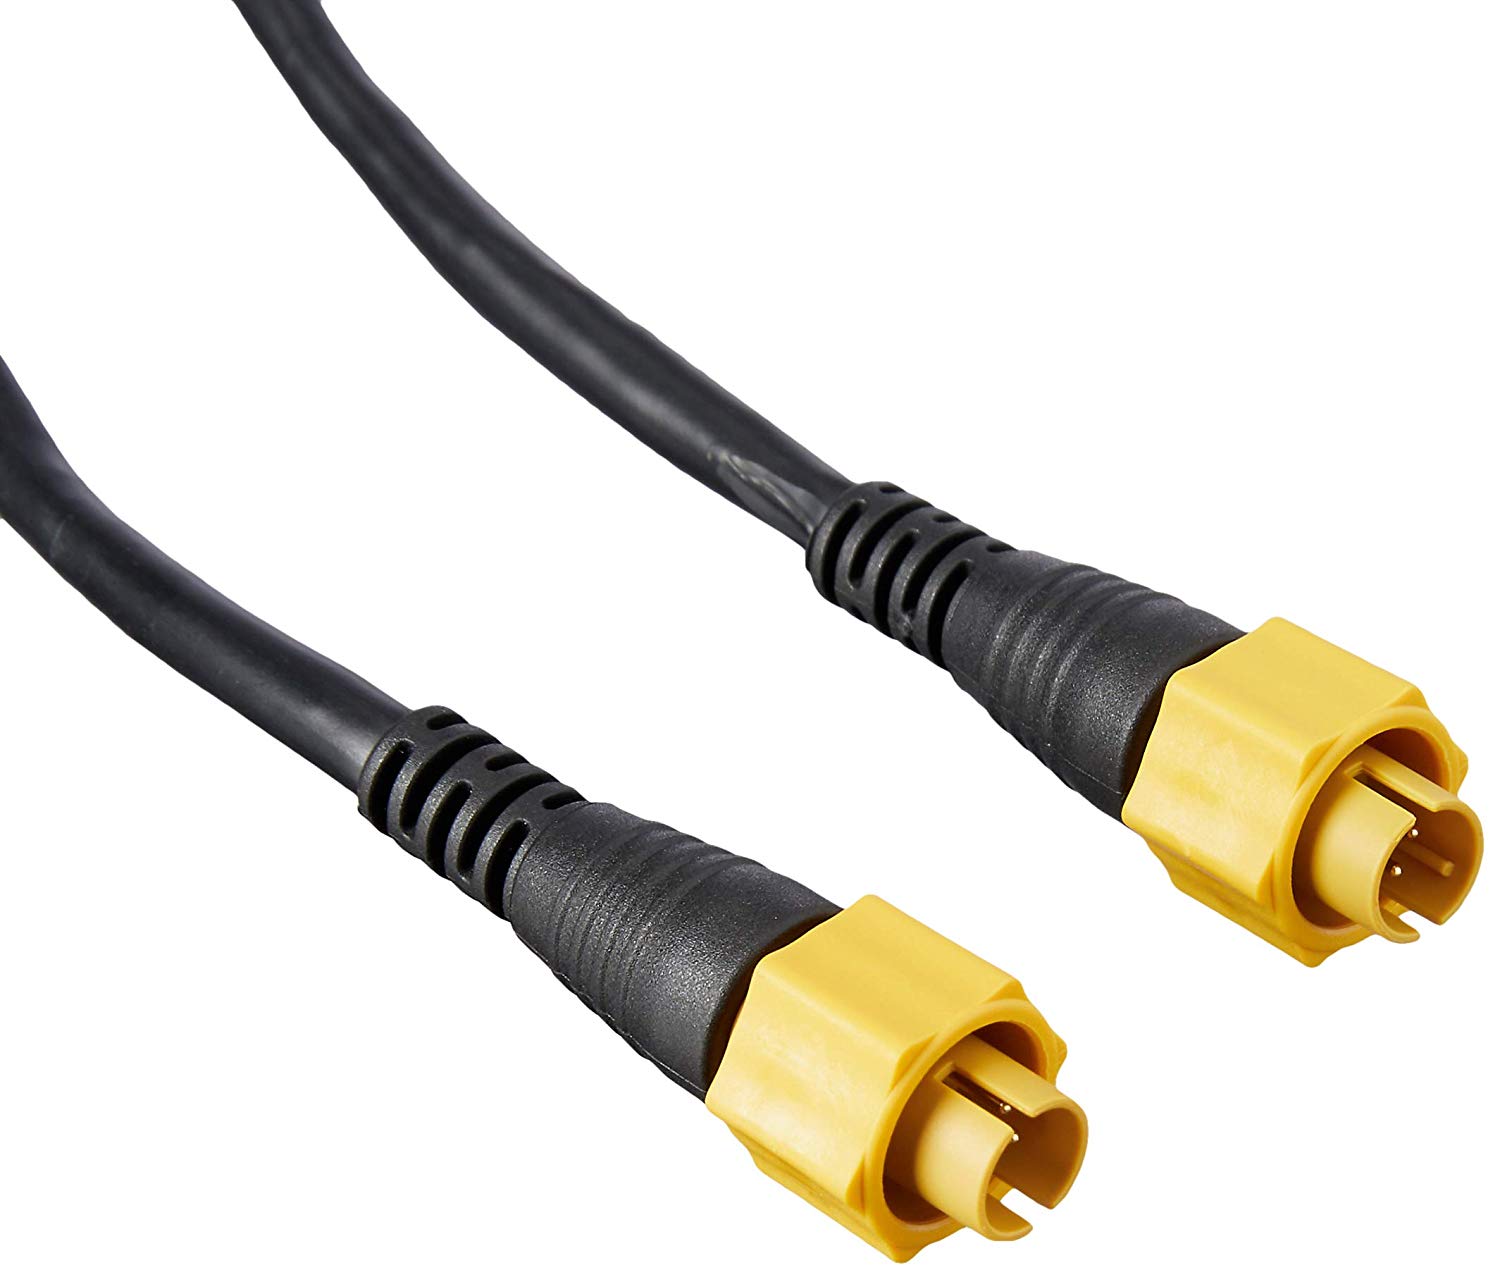 LOWRANCE 000-0127-29 ETHEXT15YL 15' Ethernet Cable